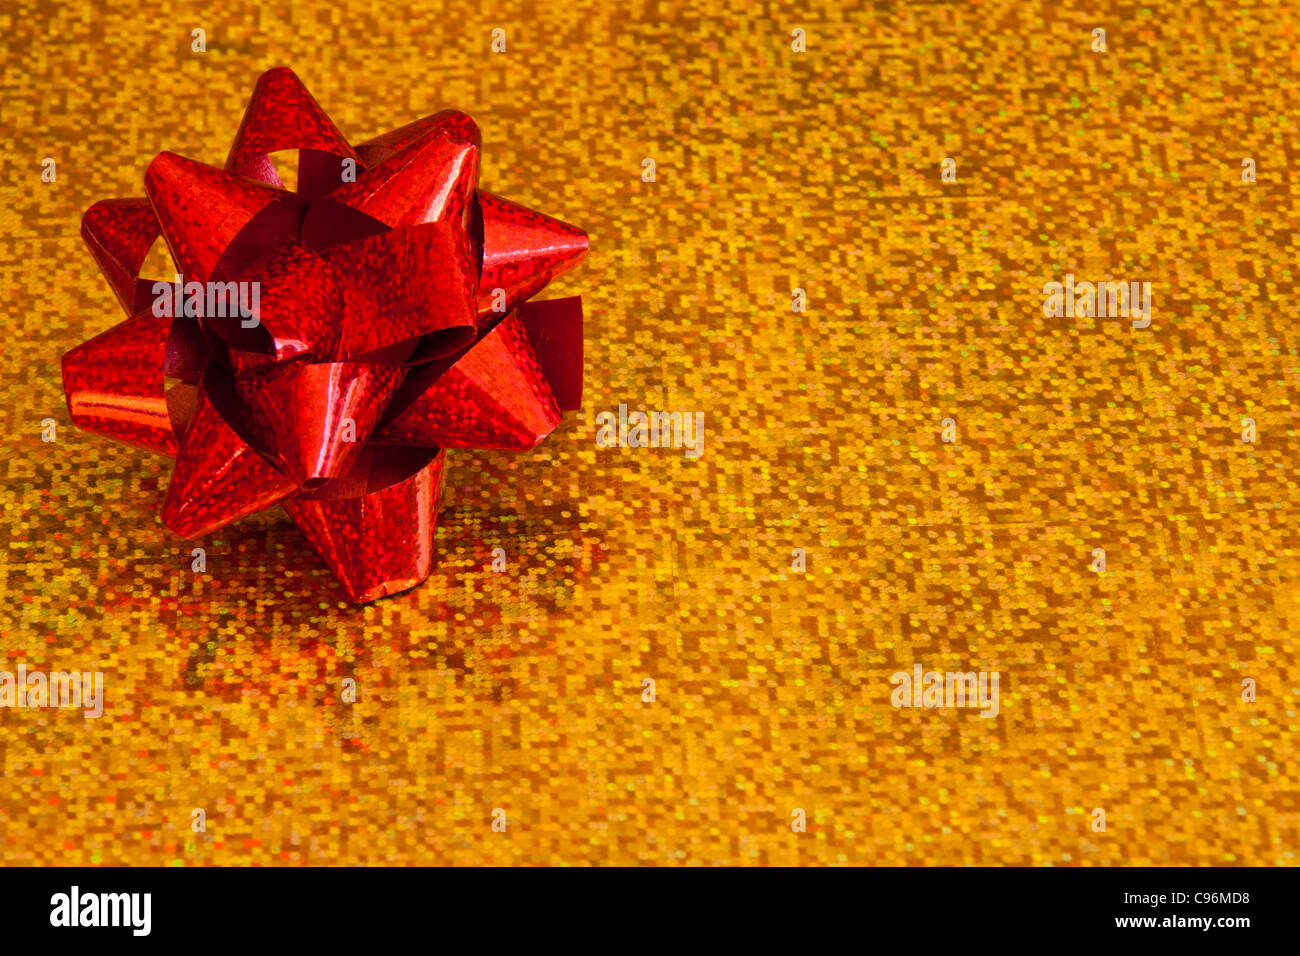 A red bow on a gold background Stock Photo